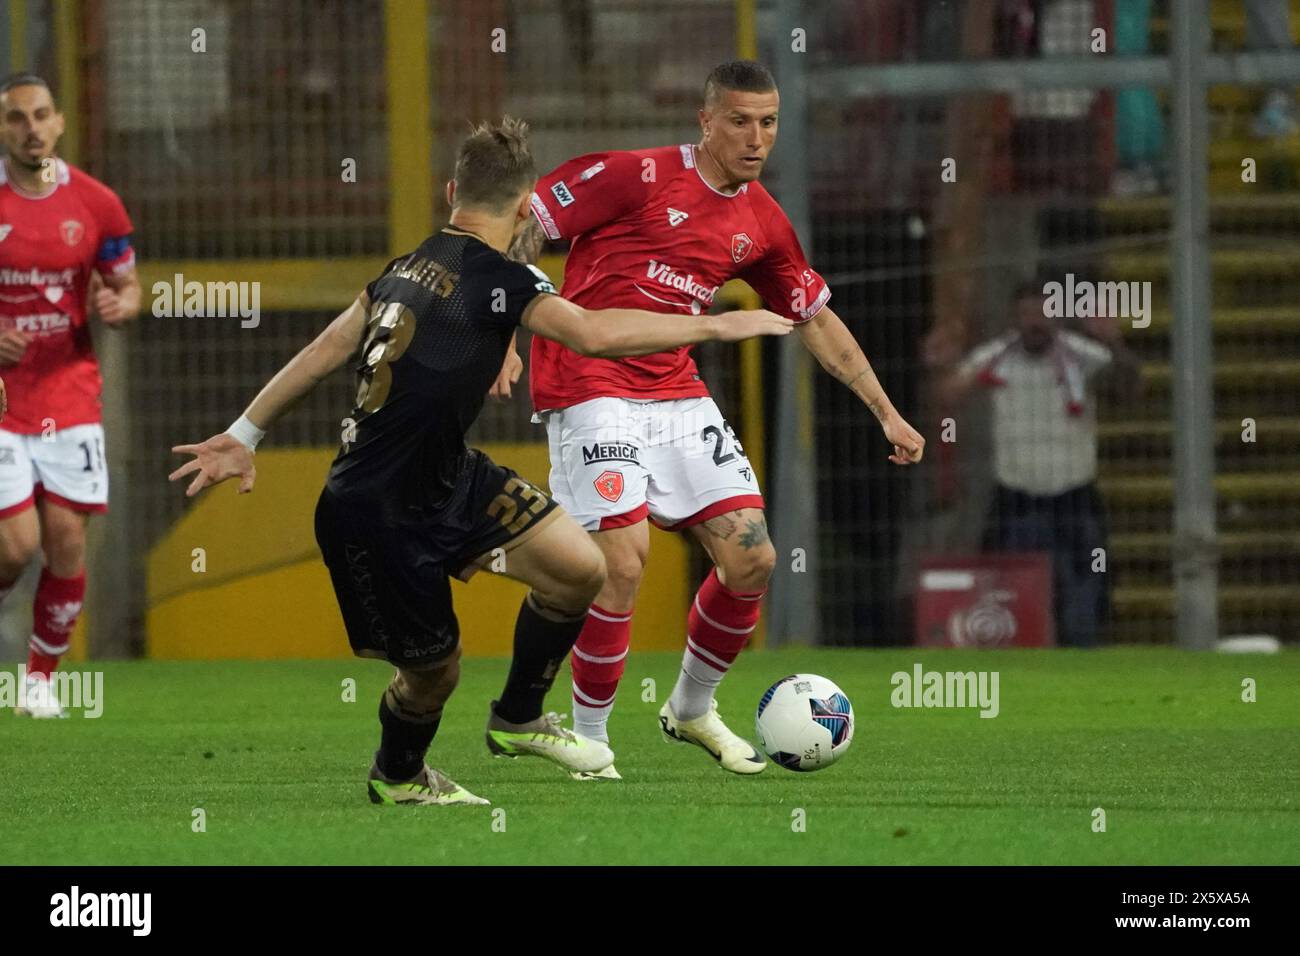 Perugia, Italy. 11th May, 2024. francesco lisi (perugia calcio) during Playoff - Perugia vs Rimini, Italian football Serie C match in Perugia, Italy, May 11 2024 Credit: Independent Photo Agency/Alamy Live News Stock Photo